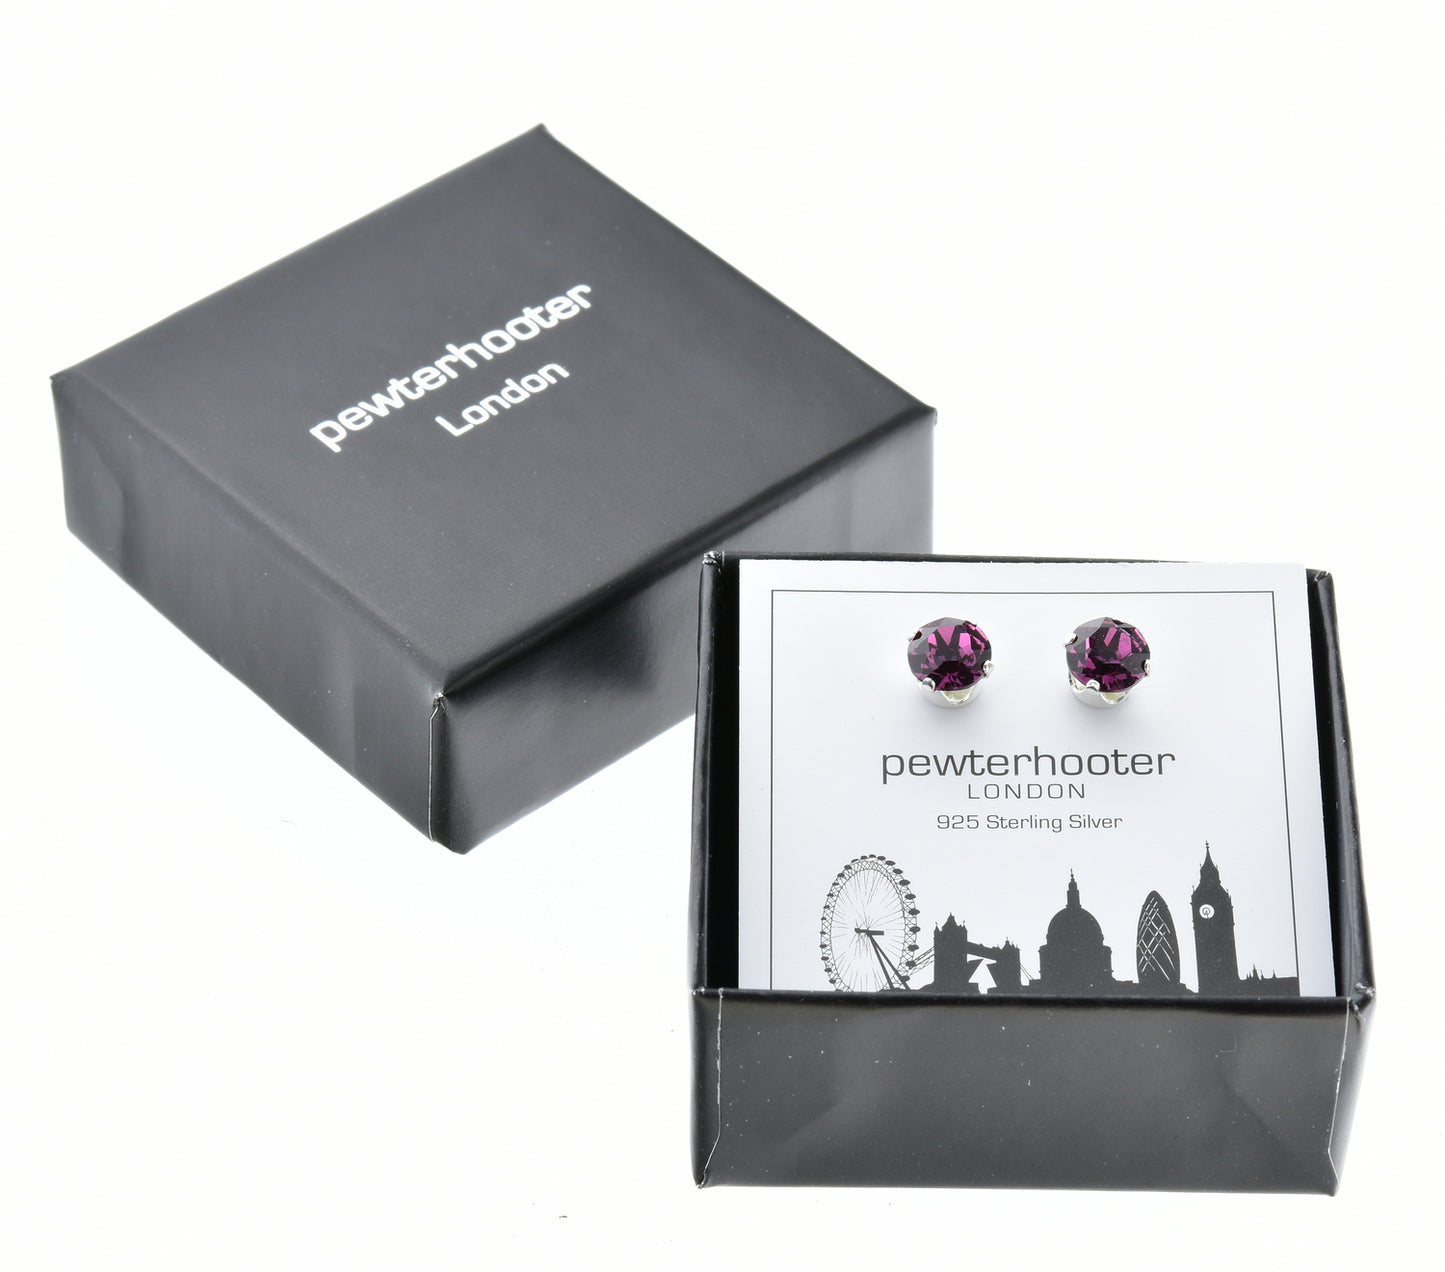 pewterhooter® Women's Classic Collection 925 Sterling silver earrings with sparkling Amethyst crystals, packaged in a gift box for any occasion.